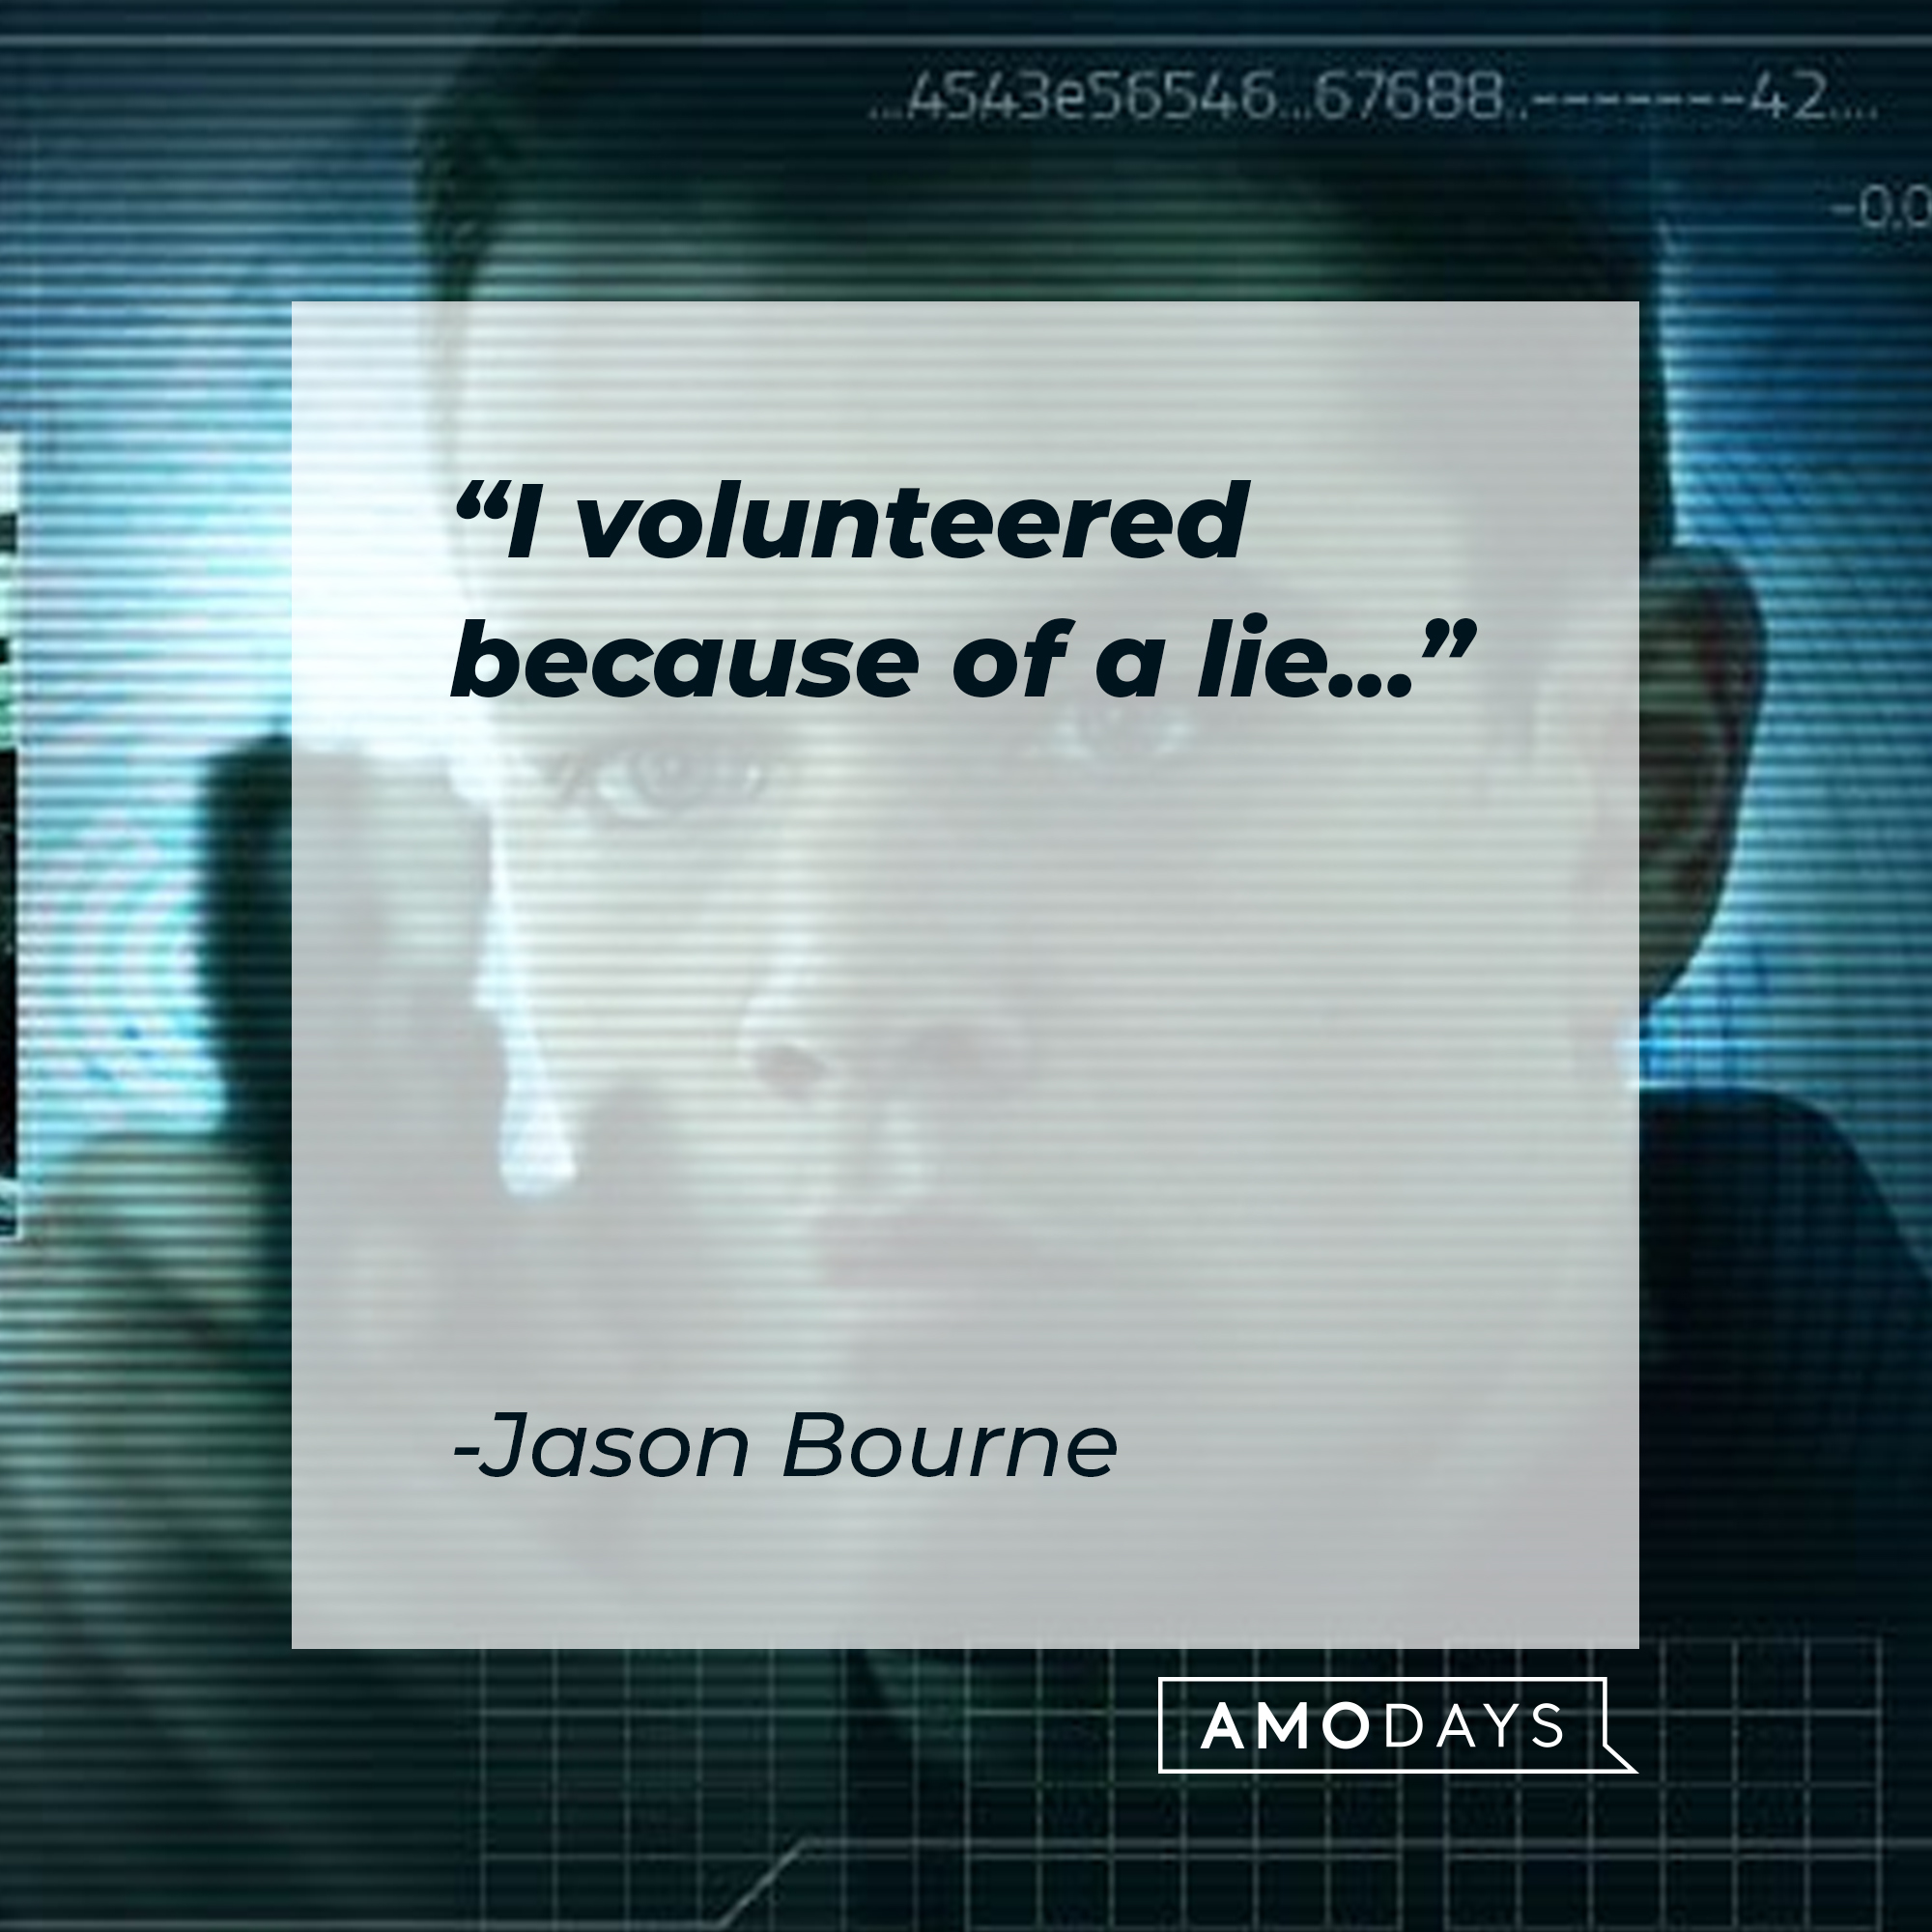 Jason Bourne's quote: "I volunteered because of a lie..." | Source: facebook.com/TheBourneSeries